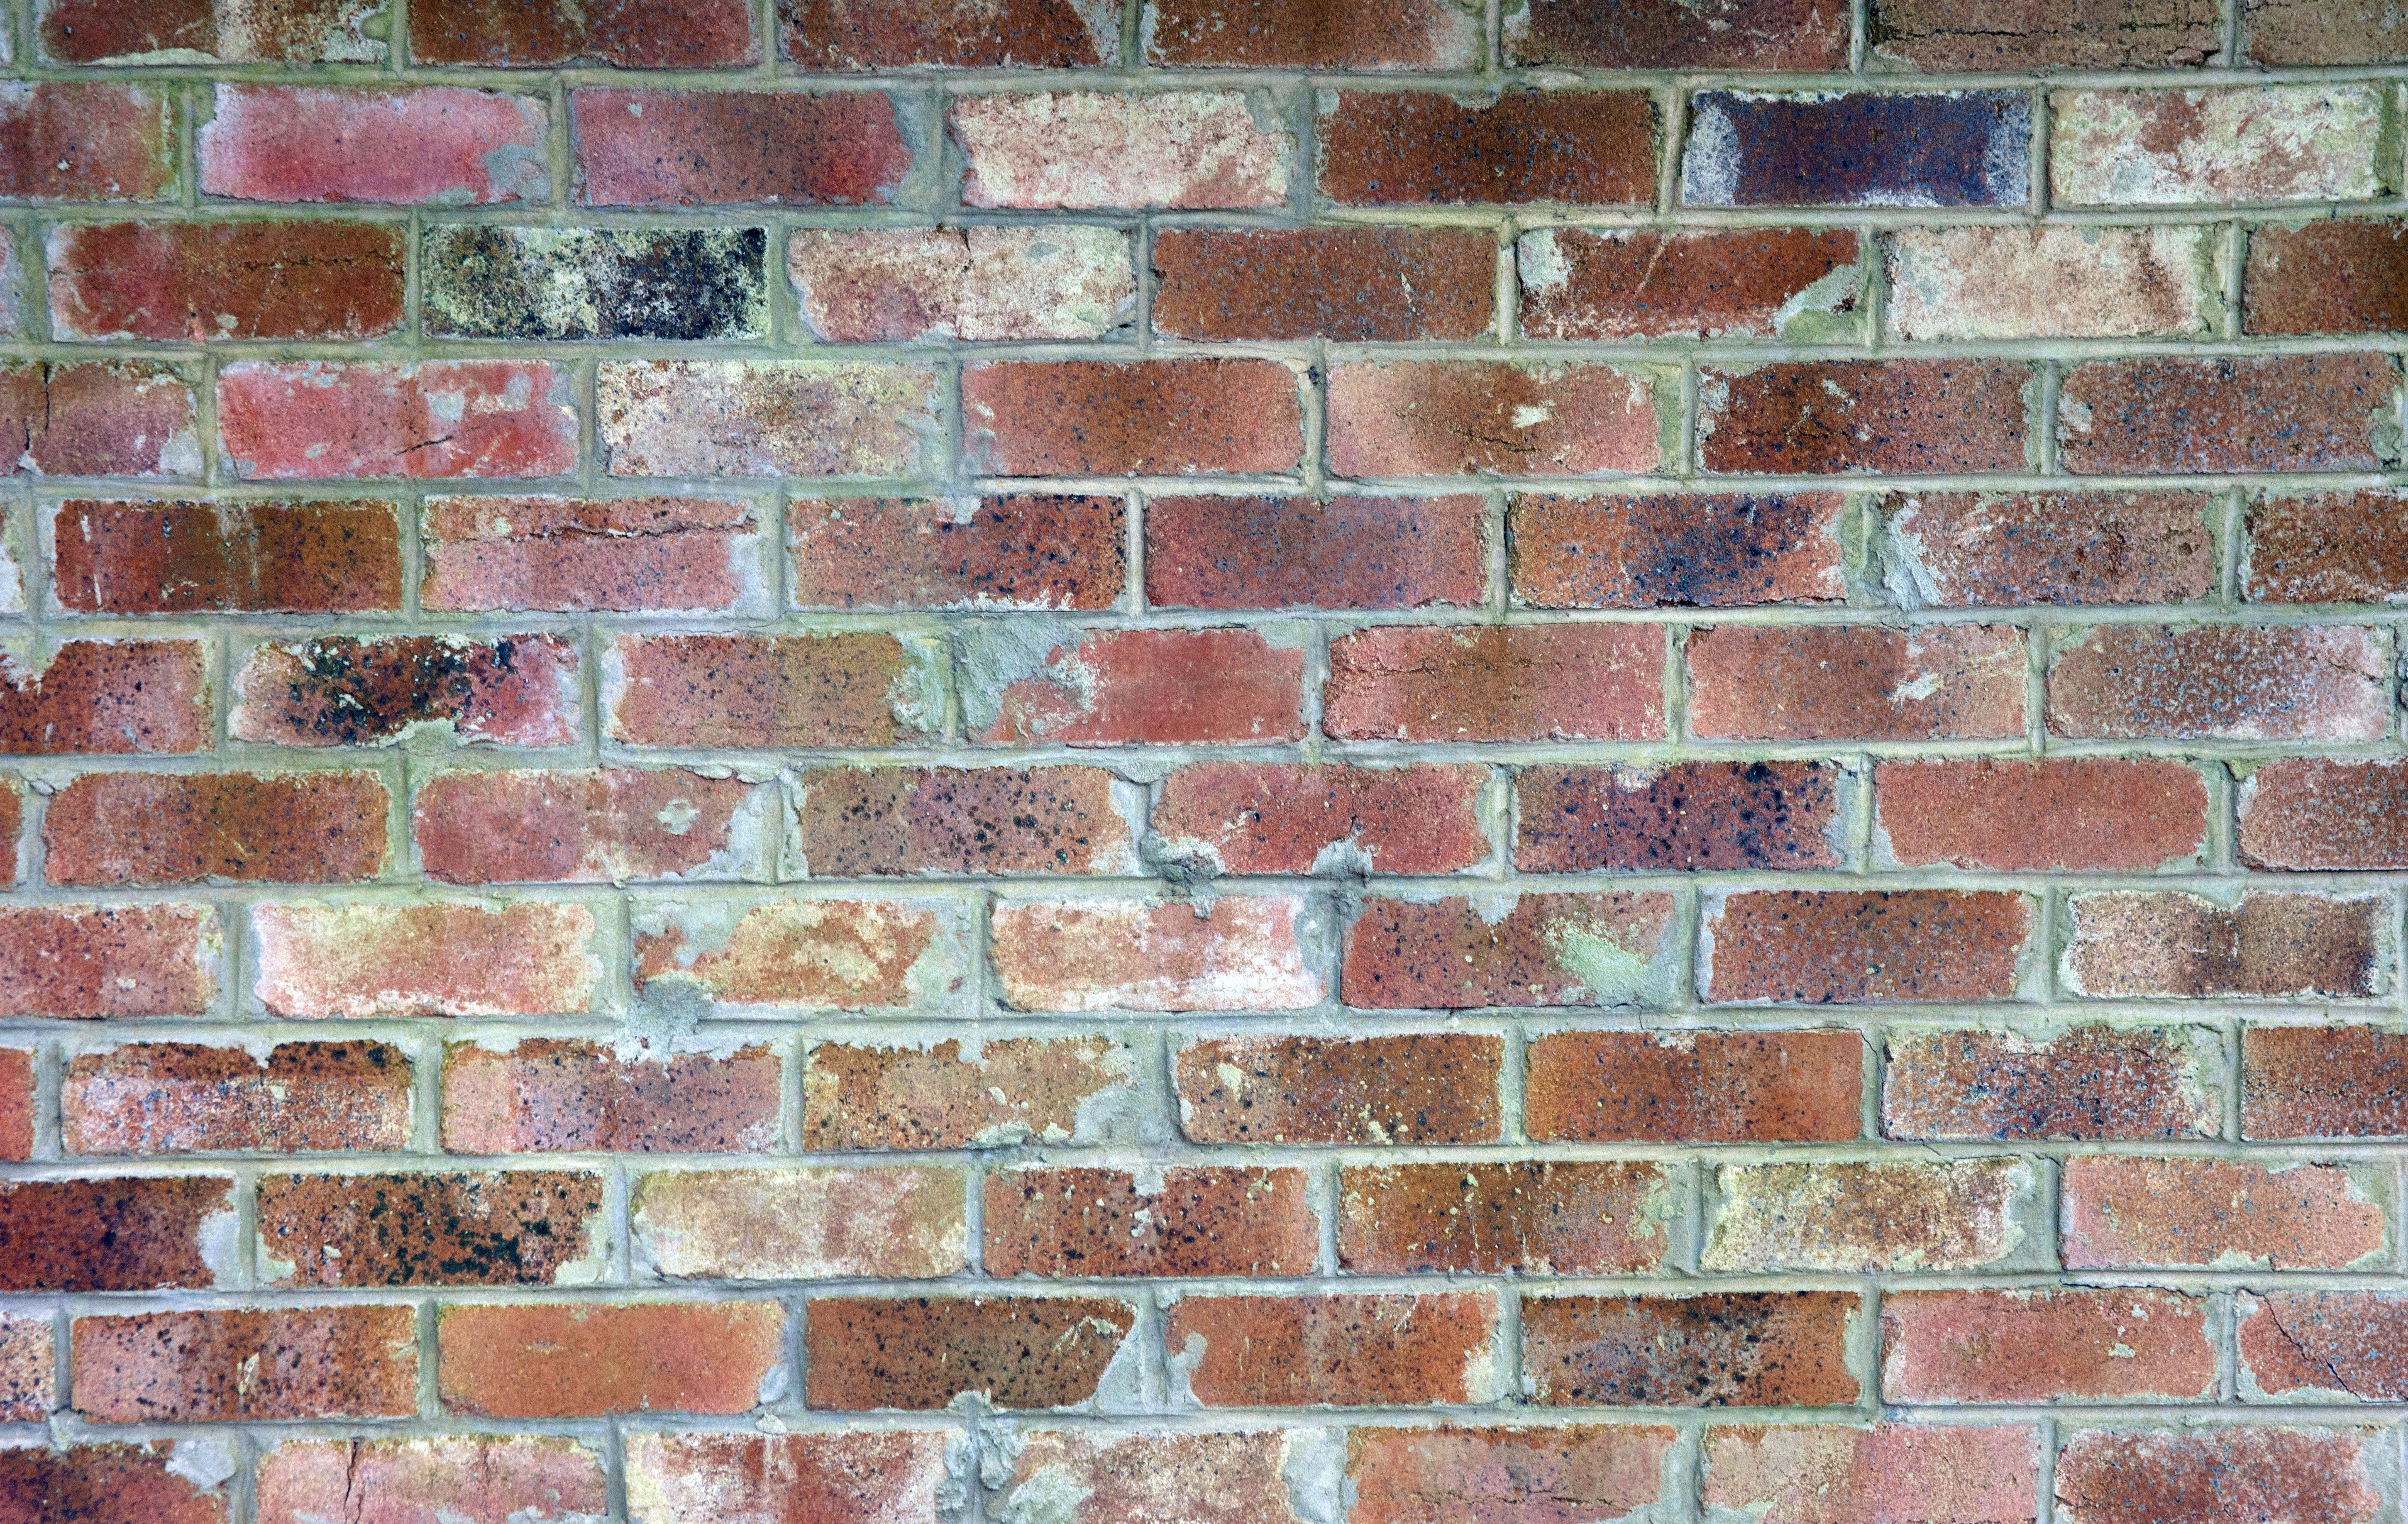 Another Old Grungy Red Brick Wall Texture